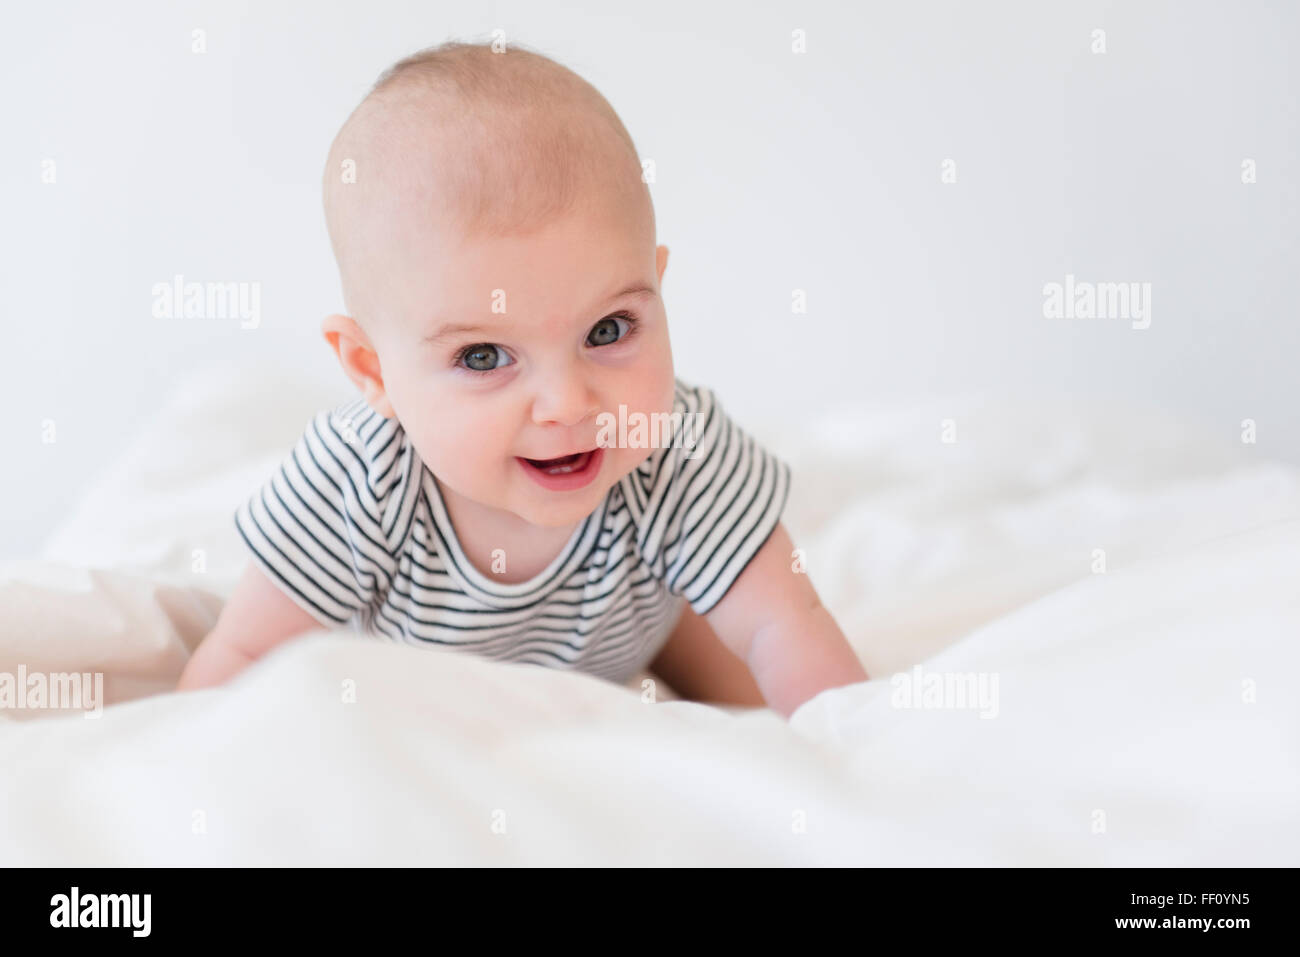 Caucasian baby girl crawling on bed Stock Photo